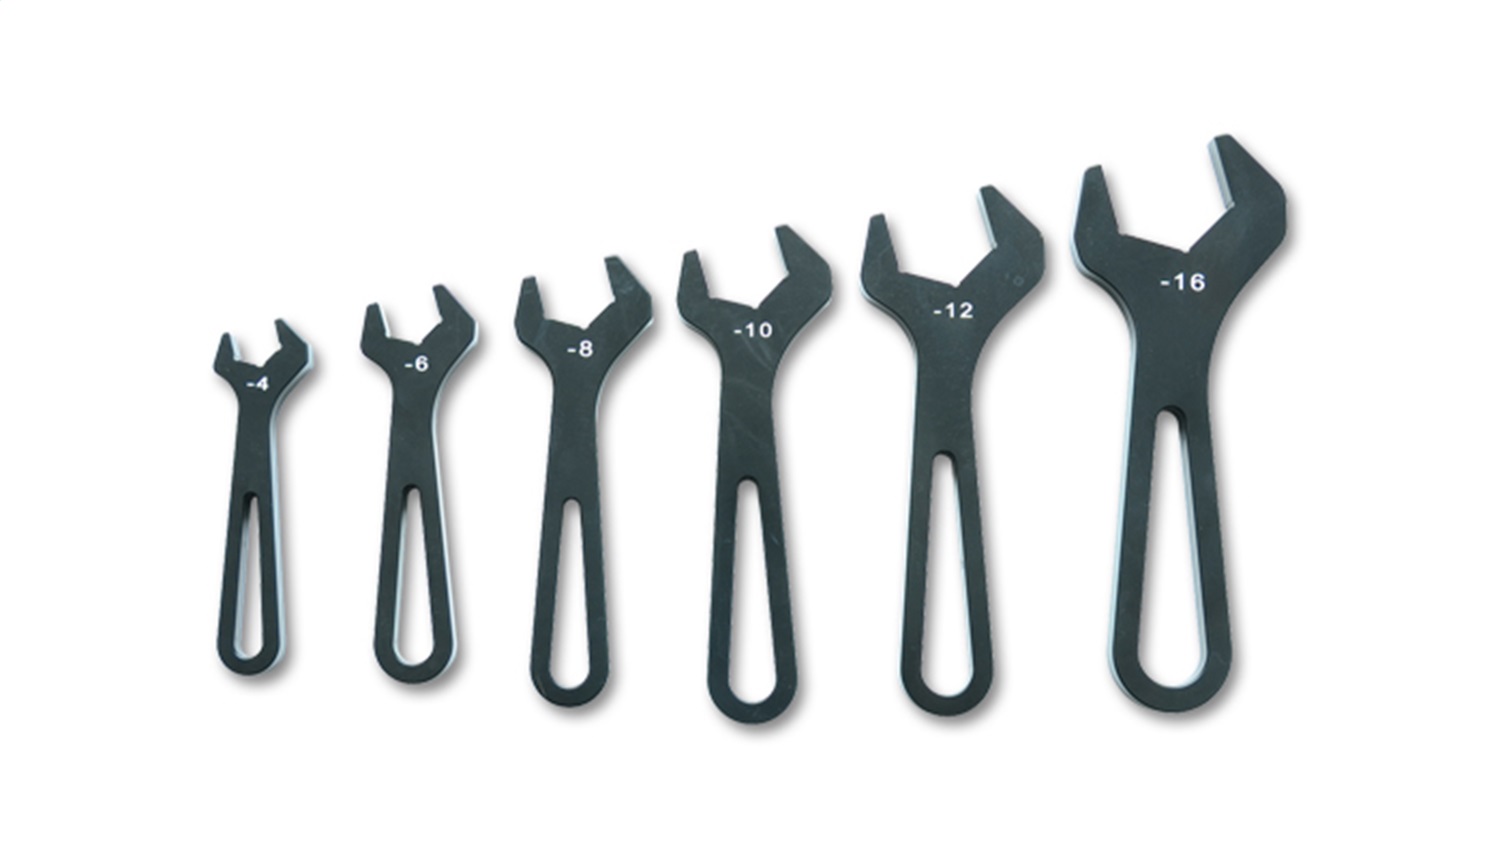 Vibrant Performance 20989 AN Wrench Set